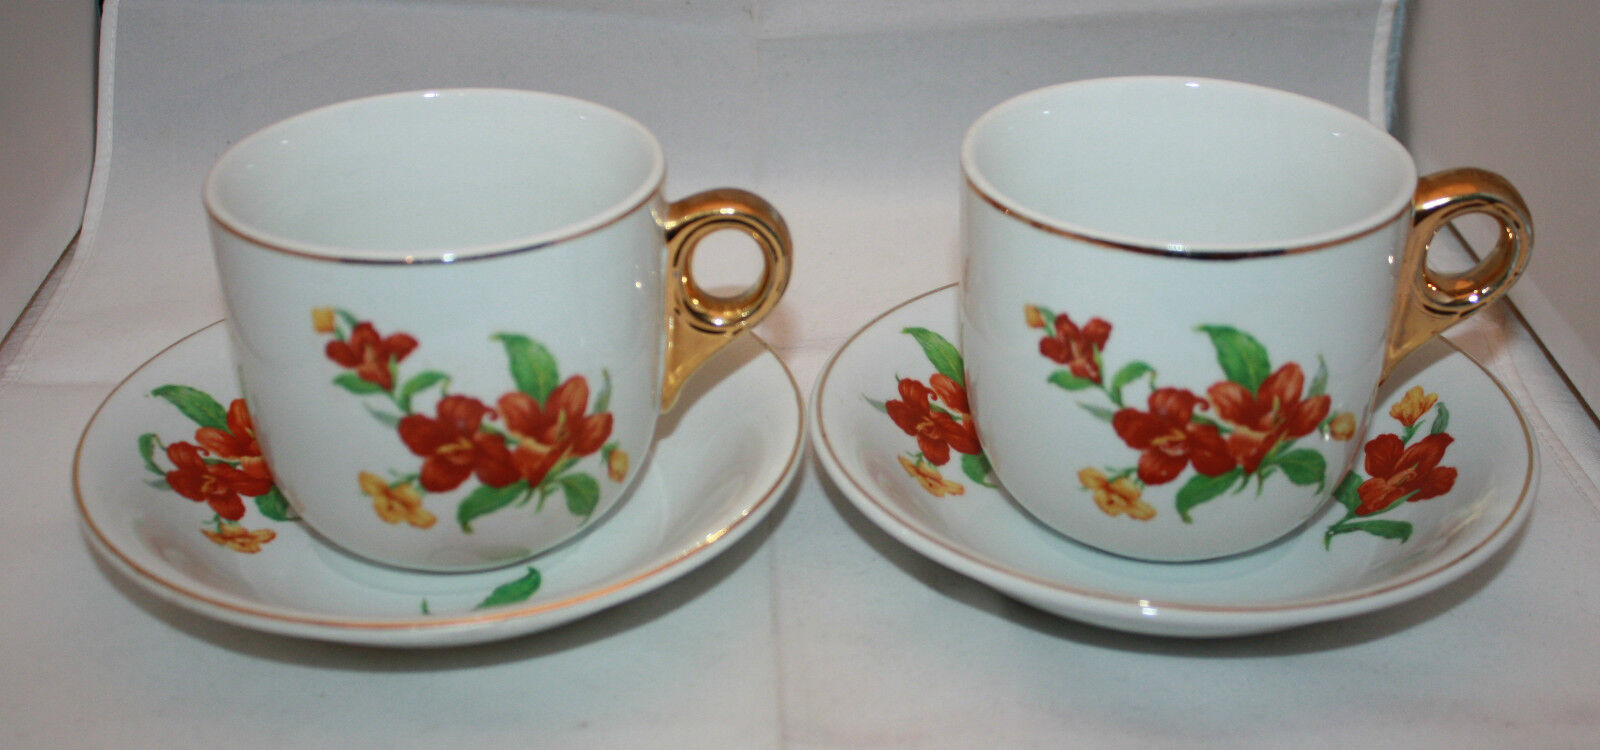 Read more about the article Vintage 2 Arabia Finland Isan Aidin Kuppi Mothers Fathers Mug Cups Saucers Rare